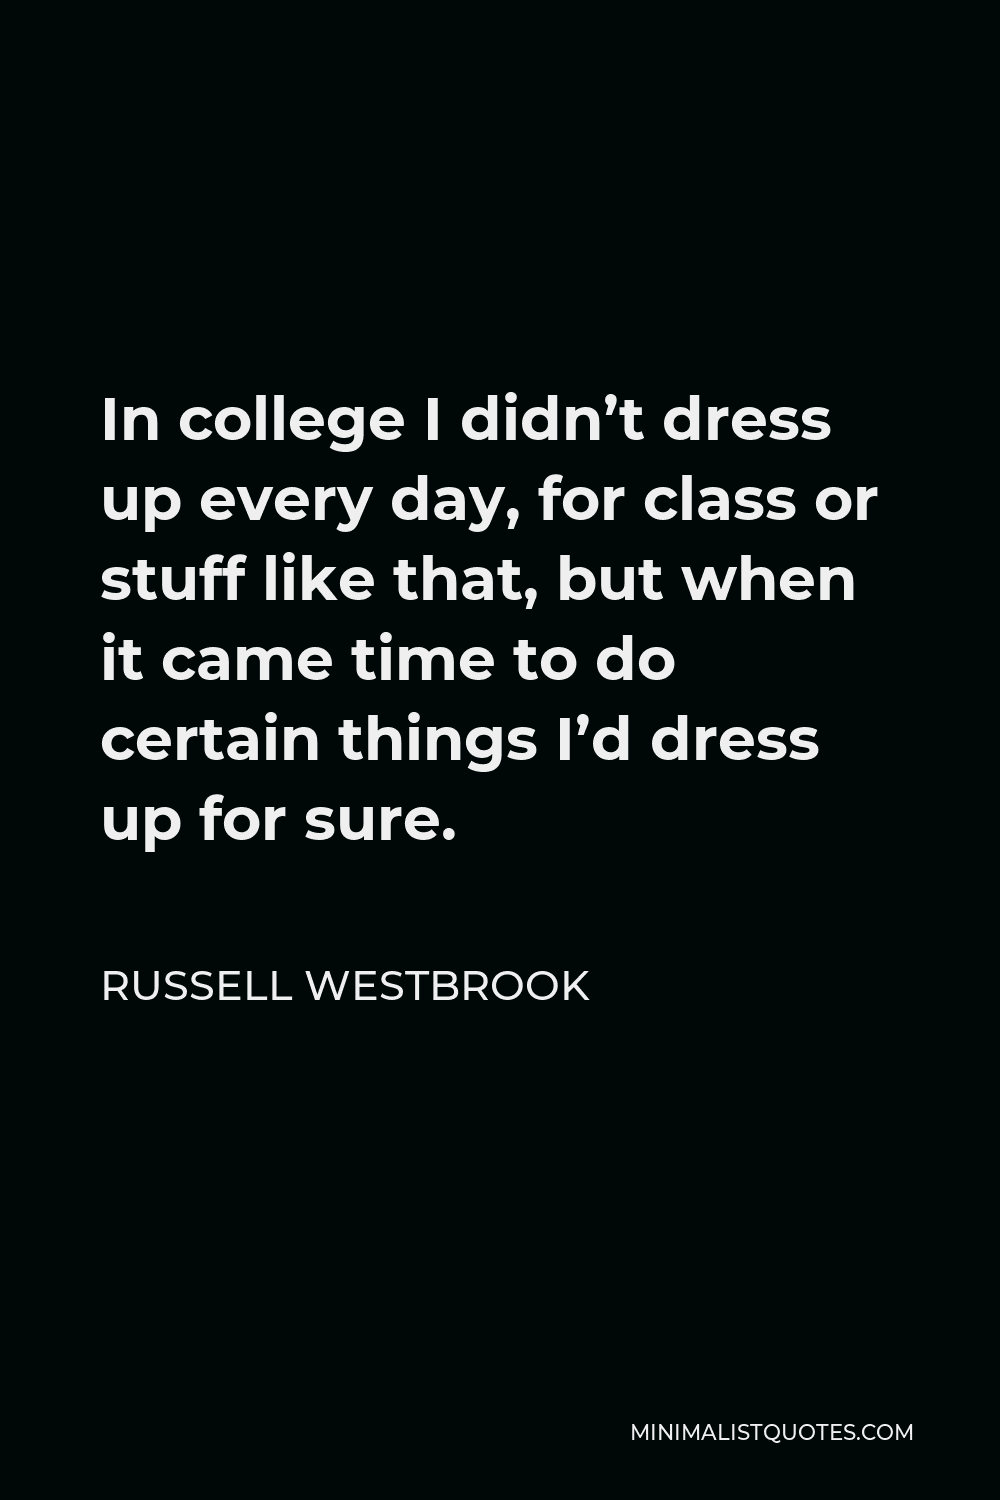 Russell Westbrook Quote - In college I didn’t dress up every day, for class or stuff like that, but when it came time to do certain things I’d dress up for sure.